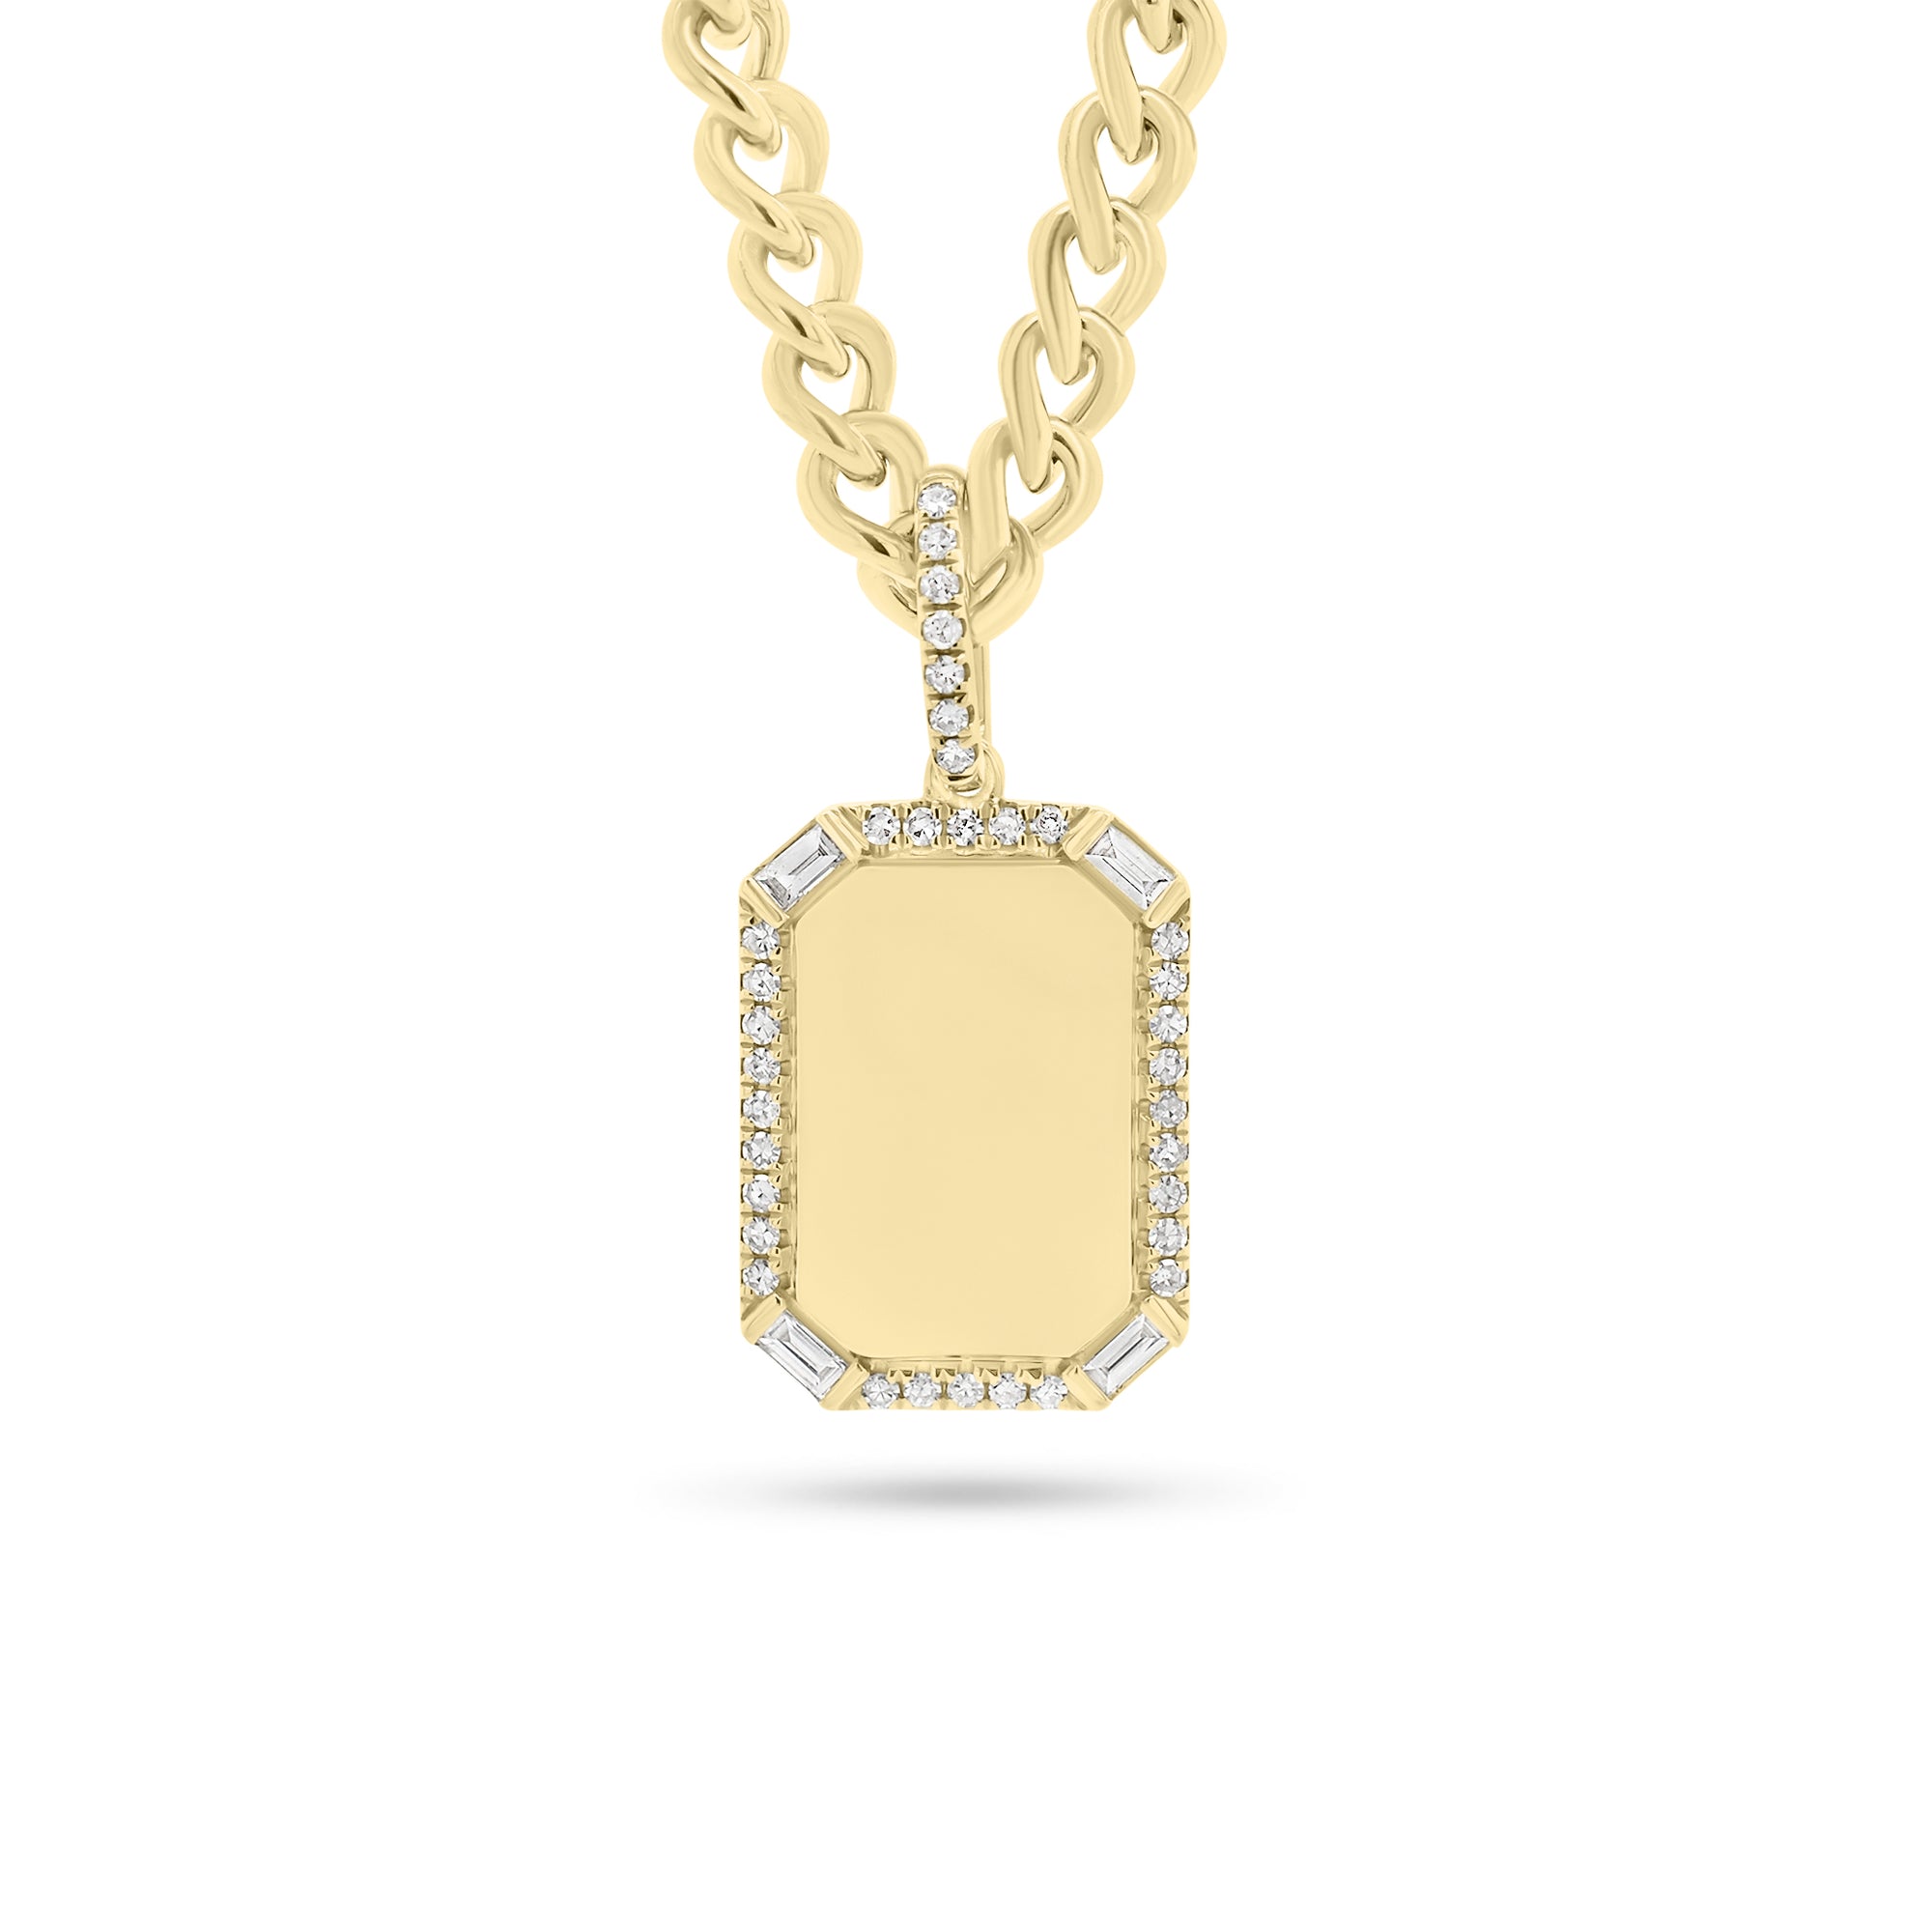 Pave & Baguette Diamond Dog Tag Pendant -14K yellow gold weighing 2.77 grams  -39 round diamonds weighing 0.12 carats  -4 slim baguettes weighing 0.20 carats